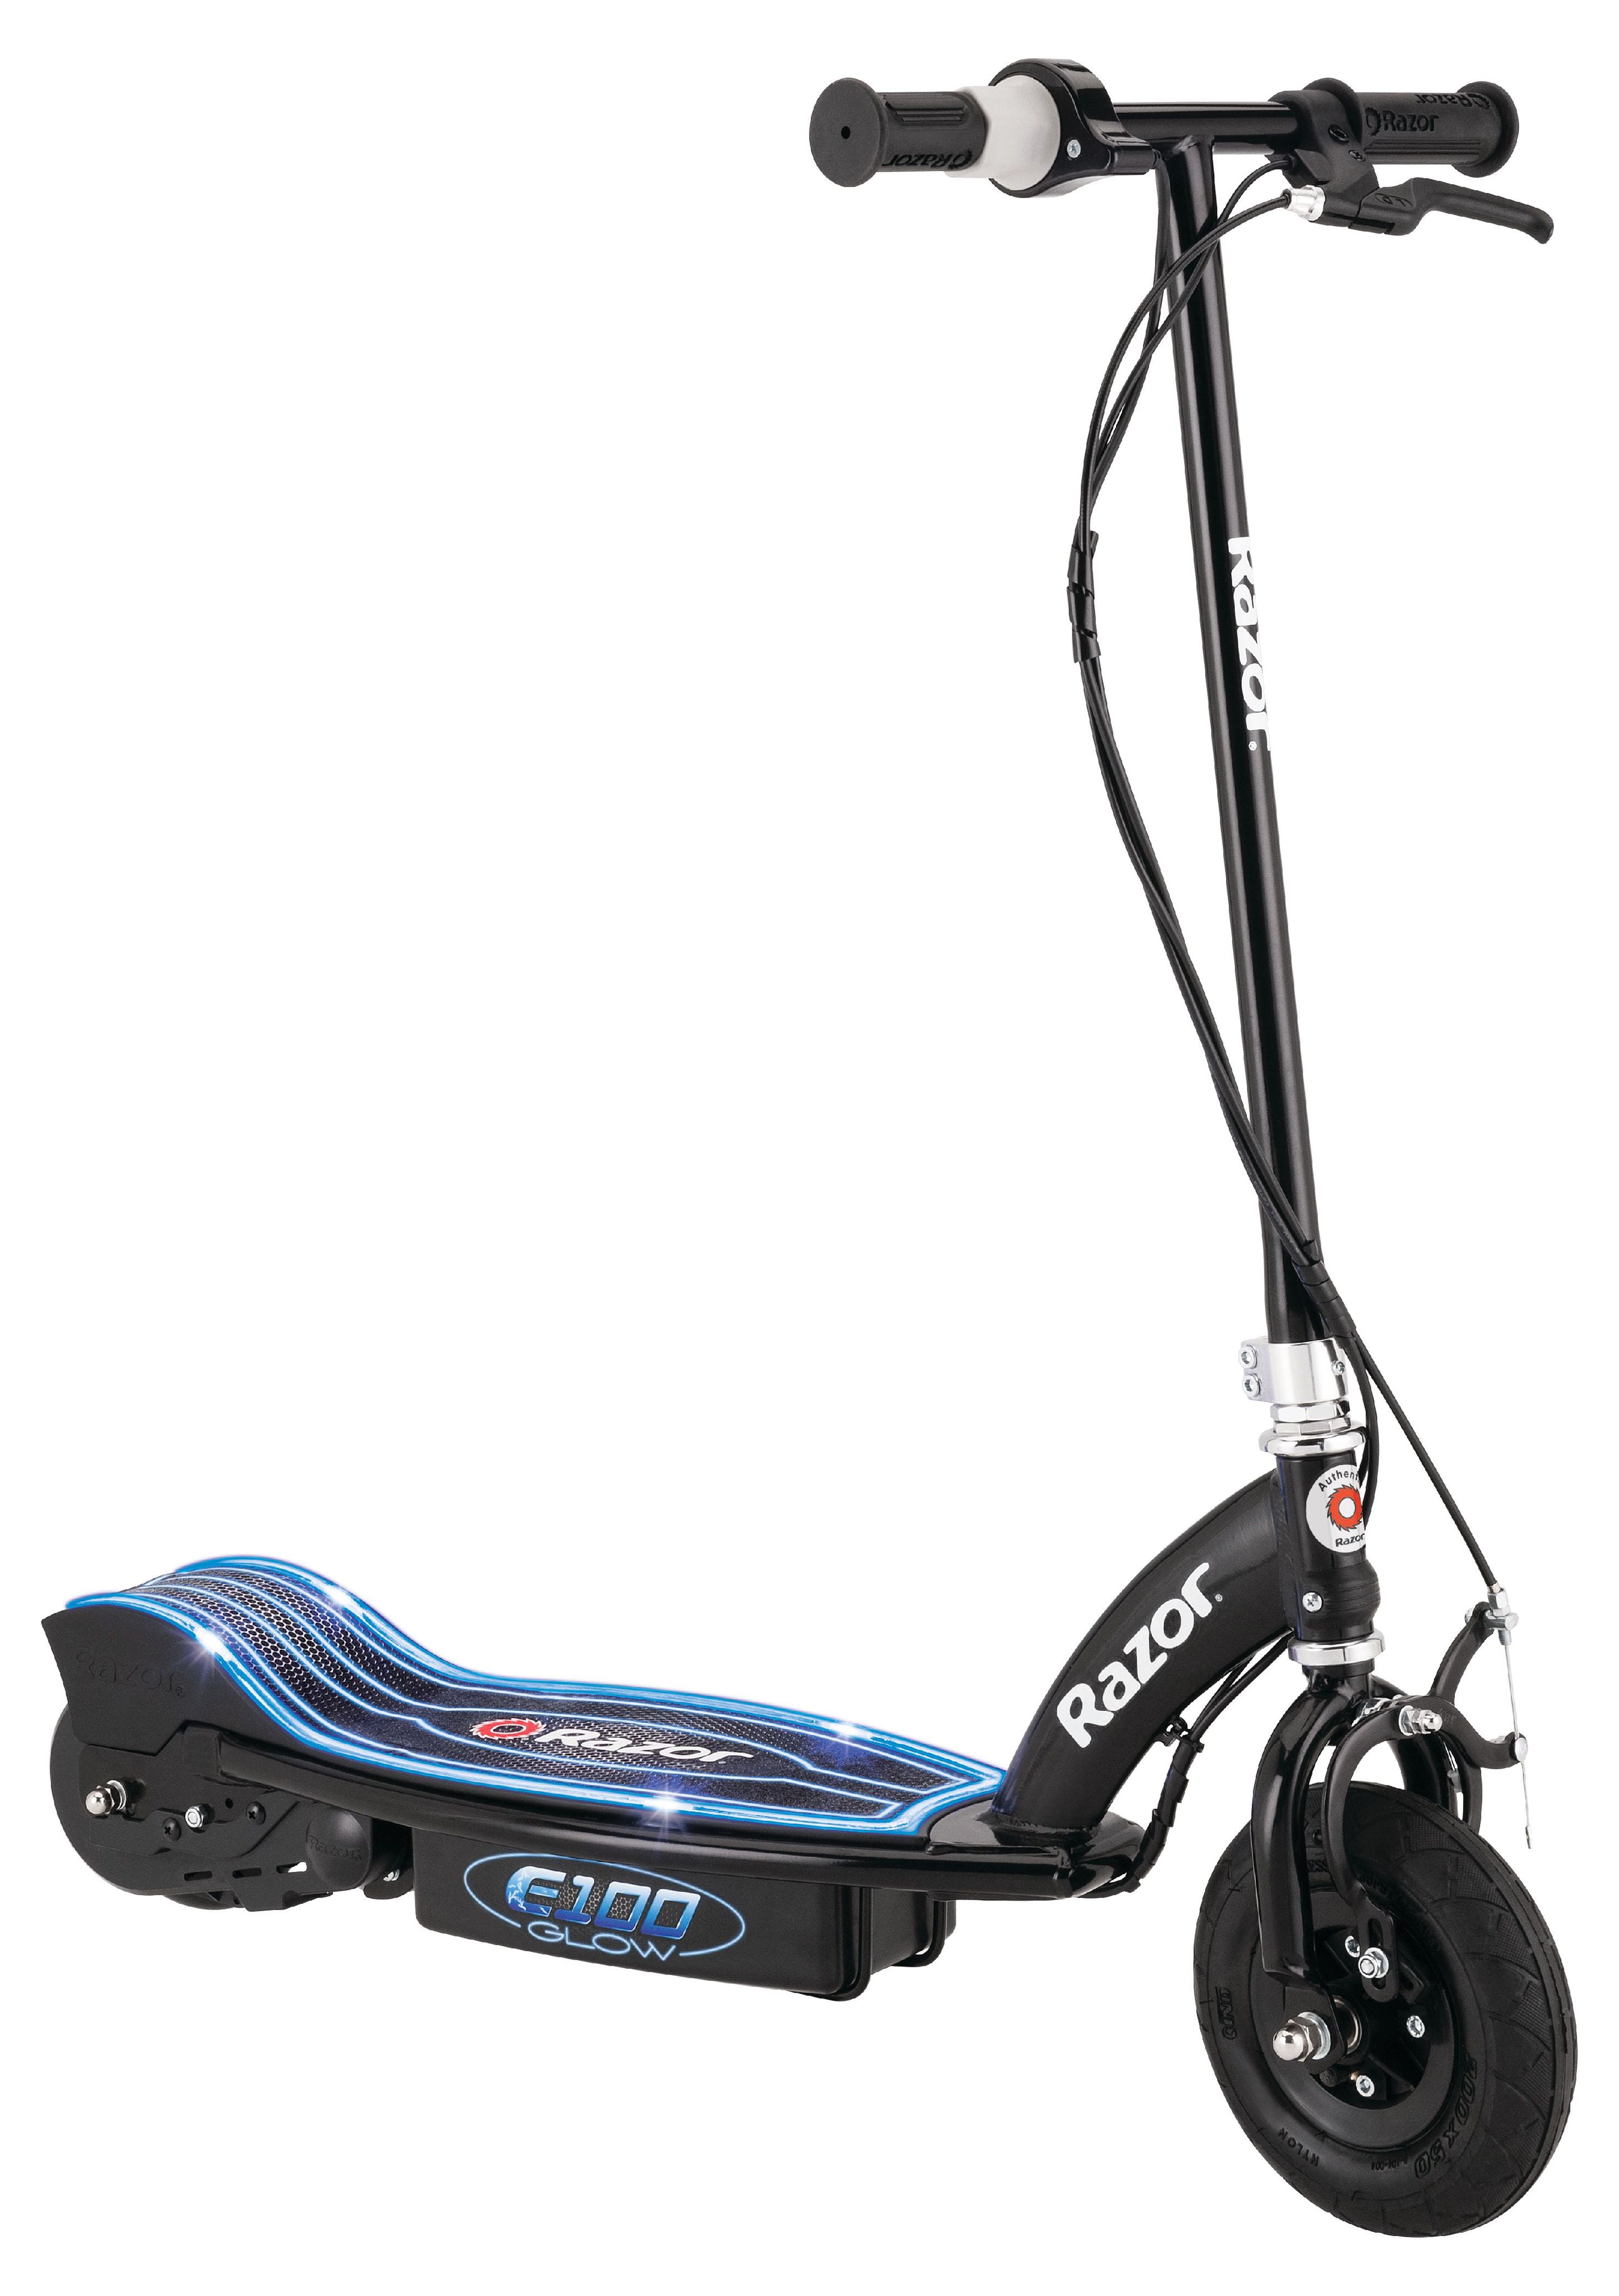 Razor E100 Electric-Powered Glow Electric Scooter, Black - image 1 of 13